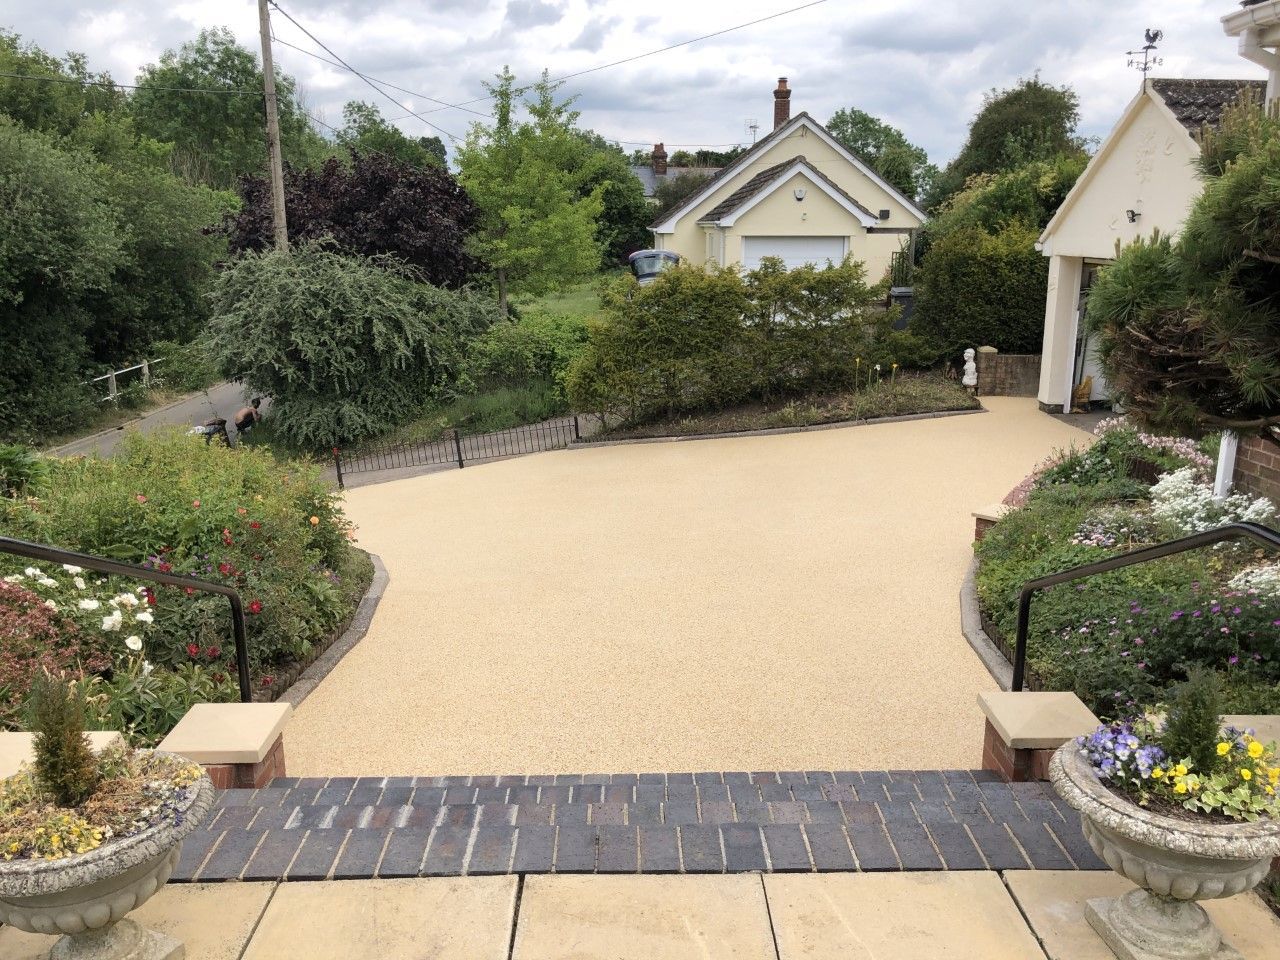 Milton Keynes resin driveway and patio specialists Quality Drives and Patios install resin driveways and patios throughout Buckinghamshire, Bedfordshire, Hertfordshire and Northamptonshire